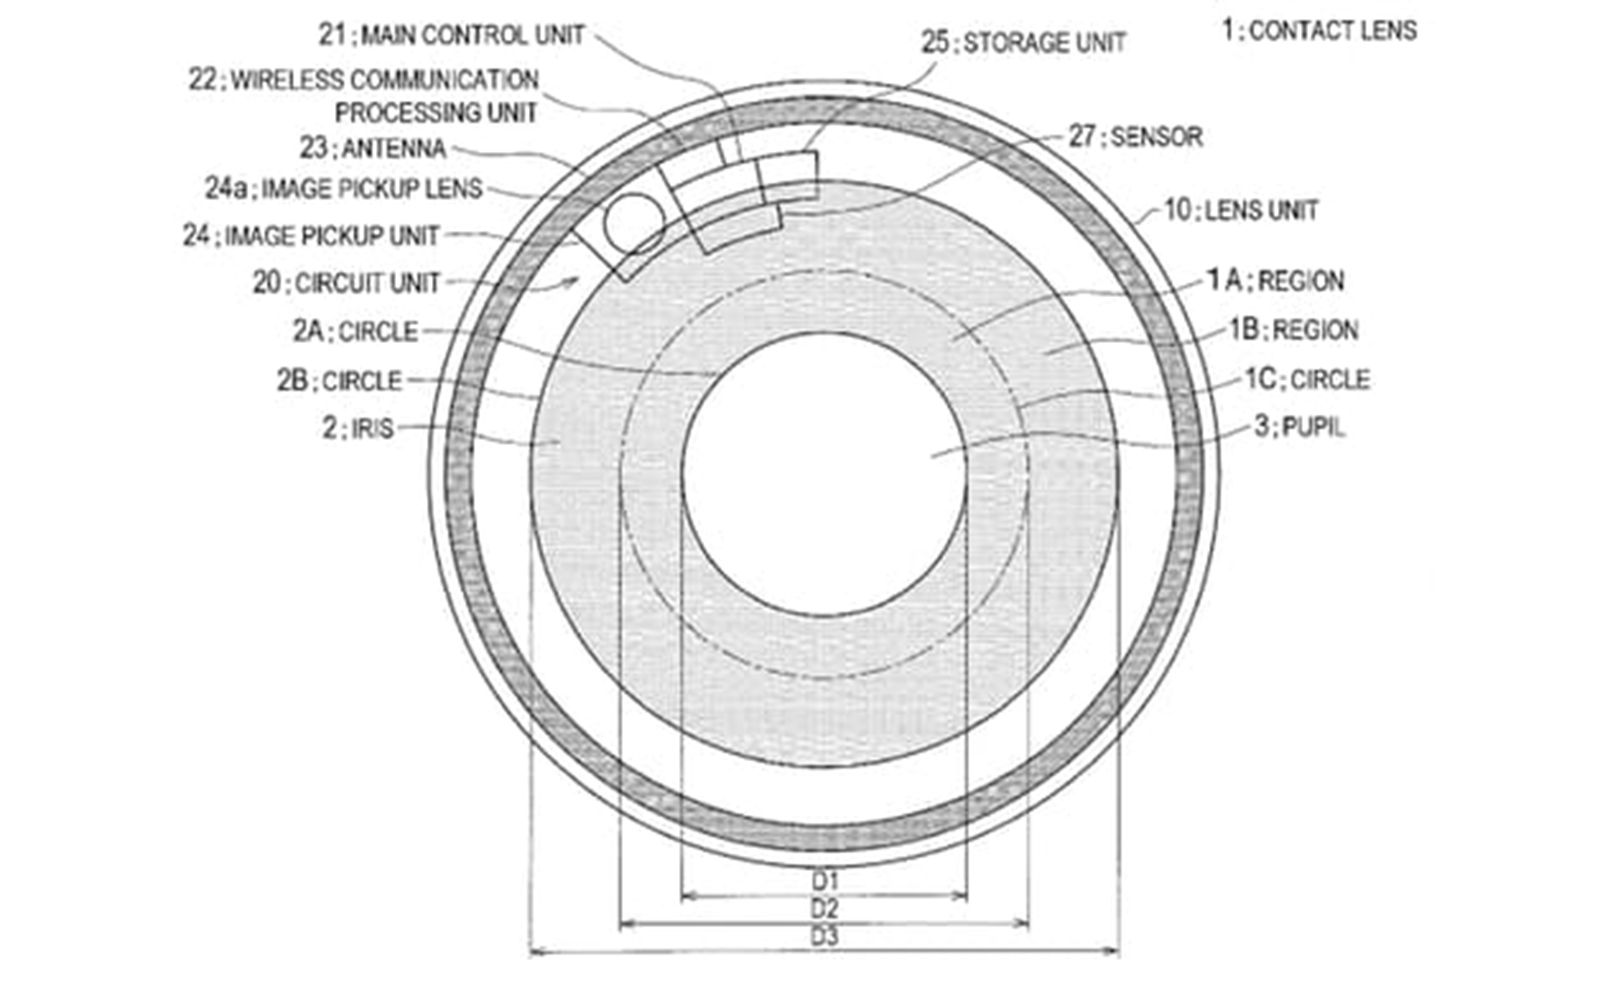 sony smart contact lens will record everything you see with the blink of an eye image 2